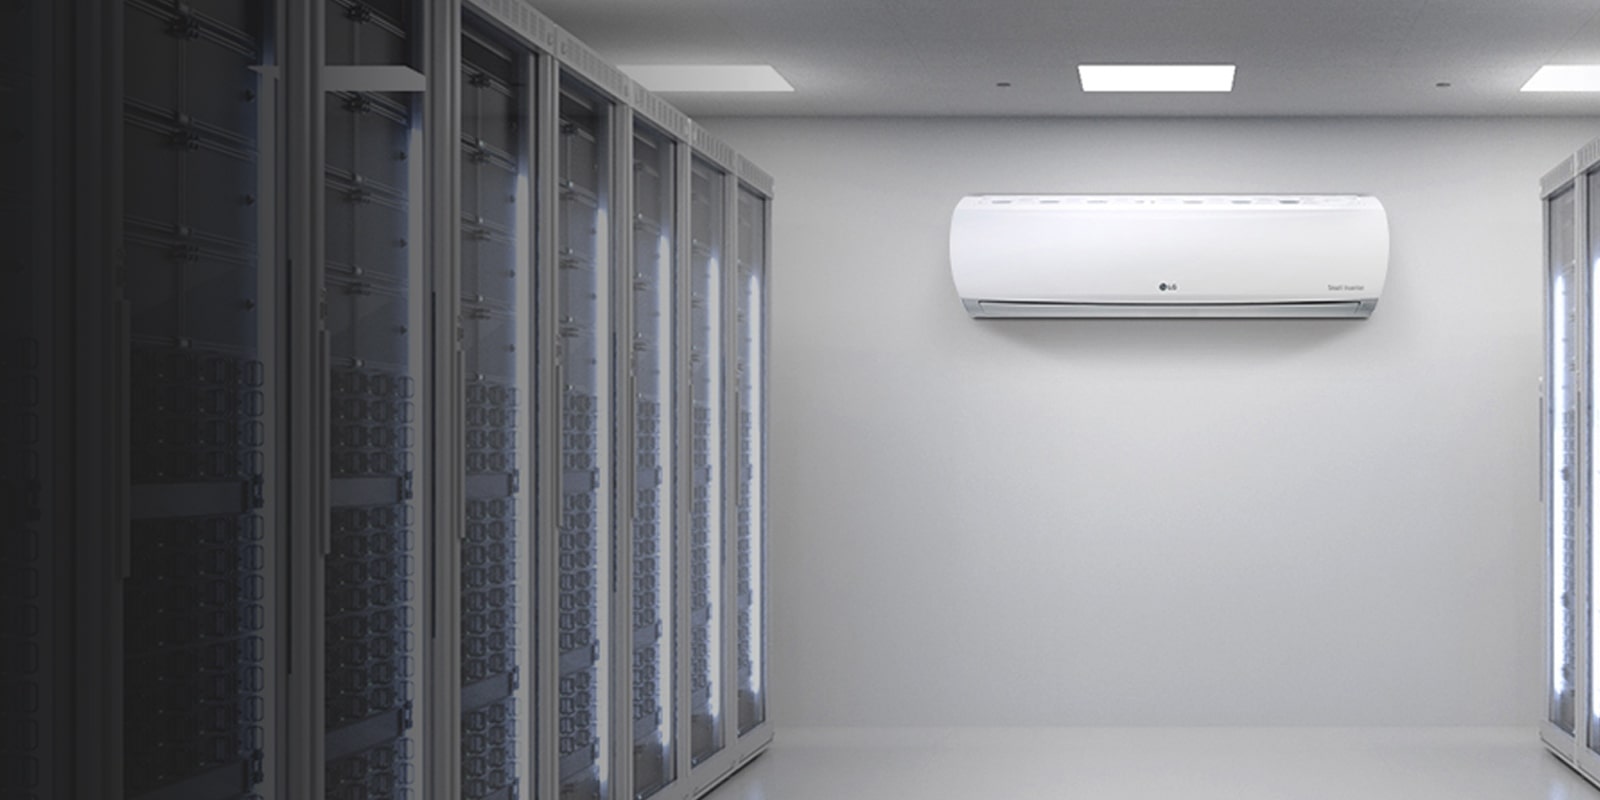 LG Wall Mounted Air Conditioners | LG Philippines Business